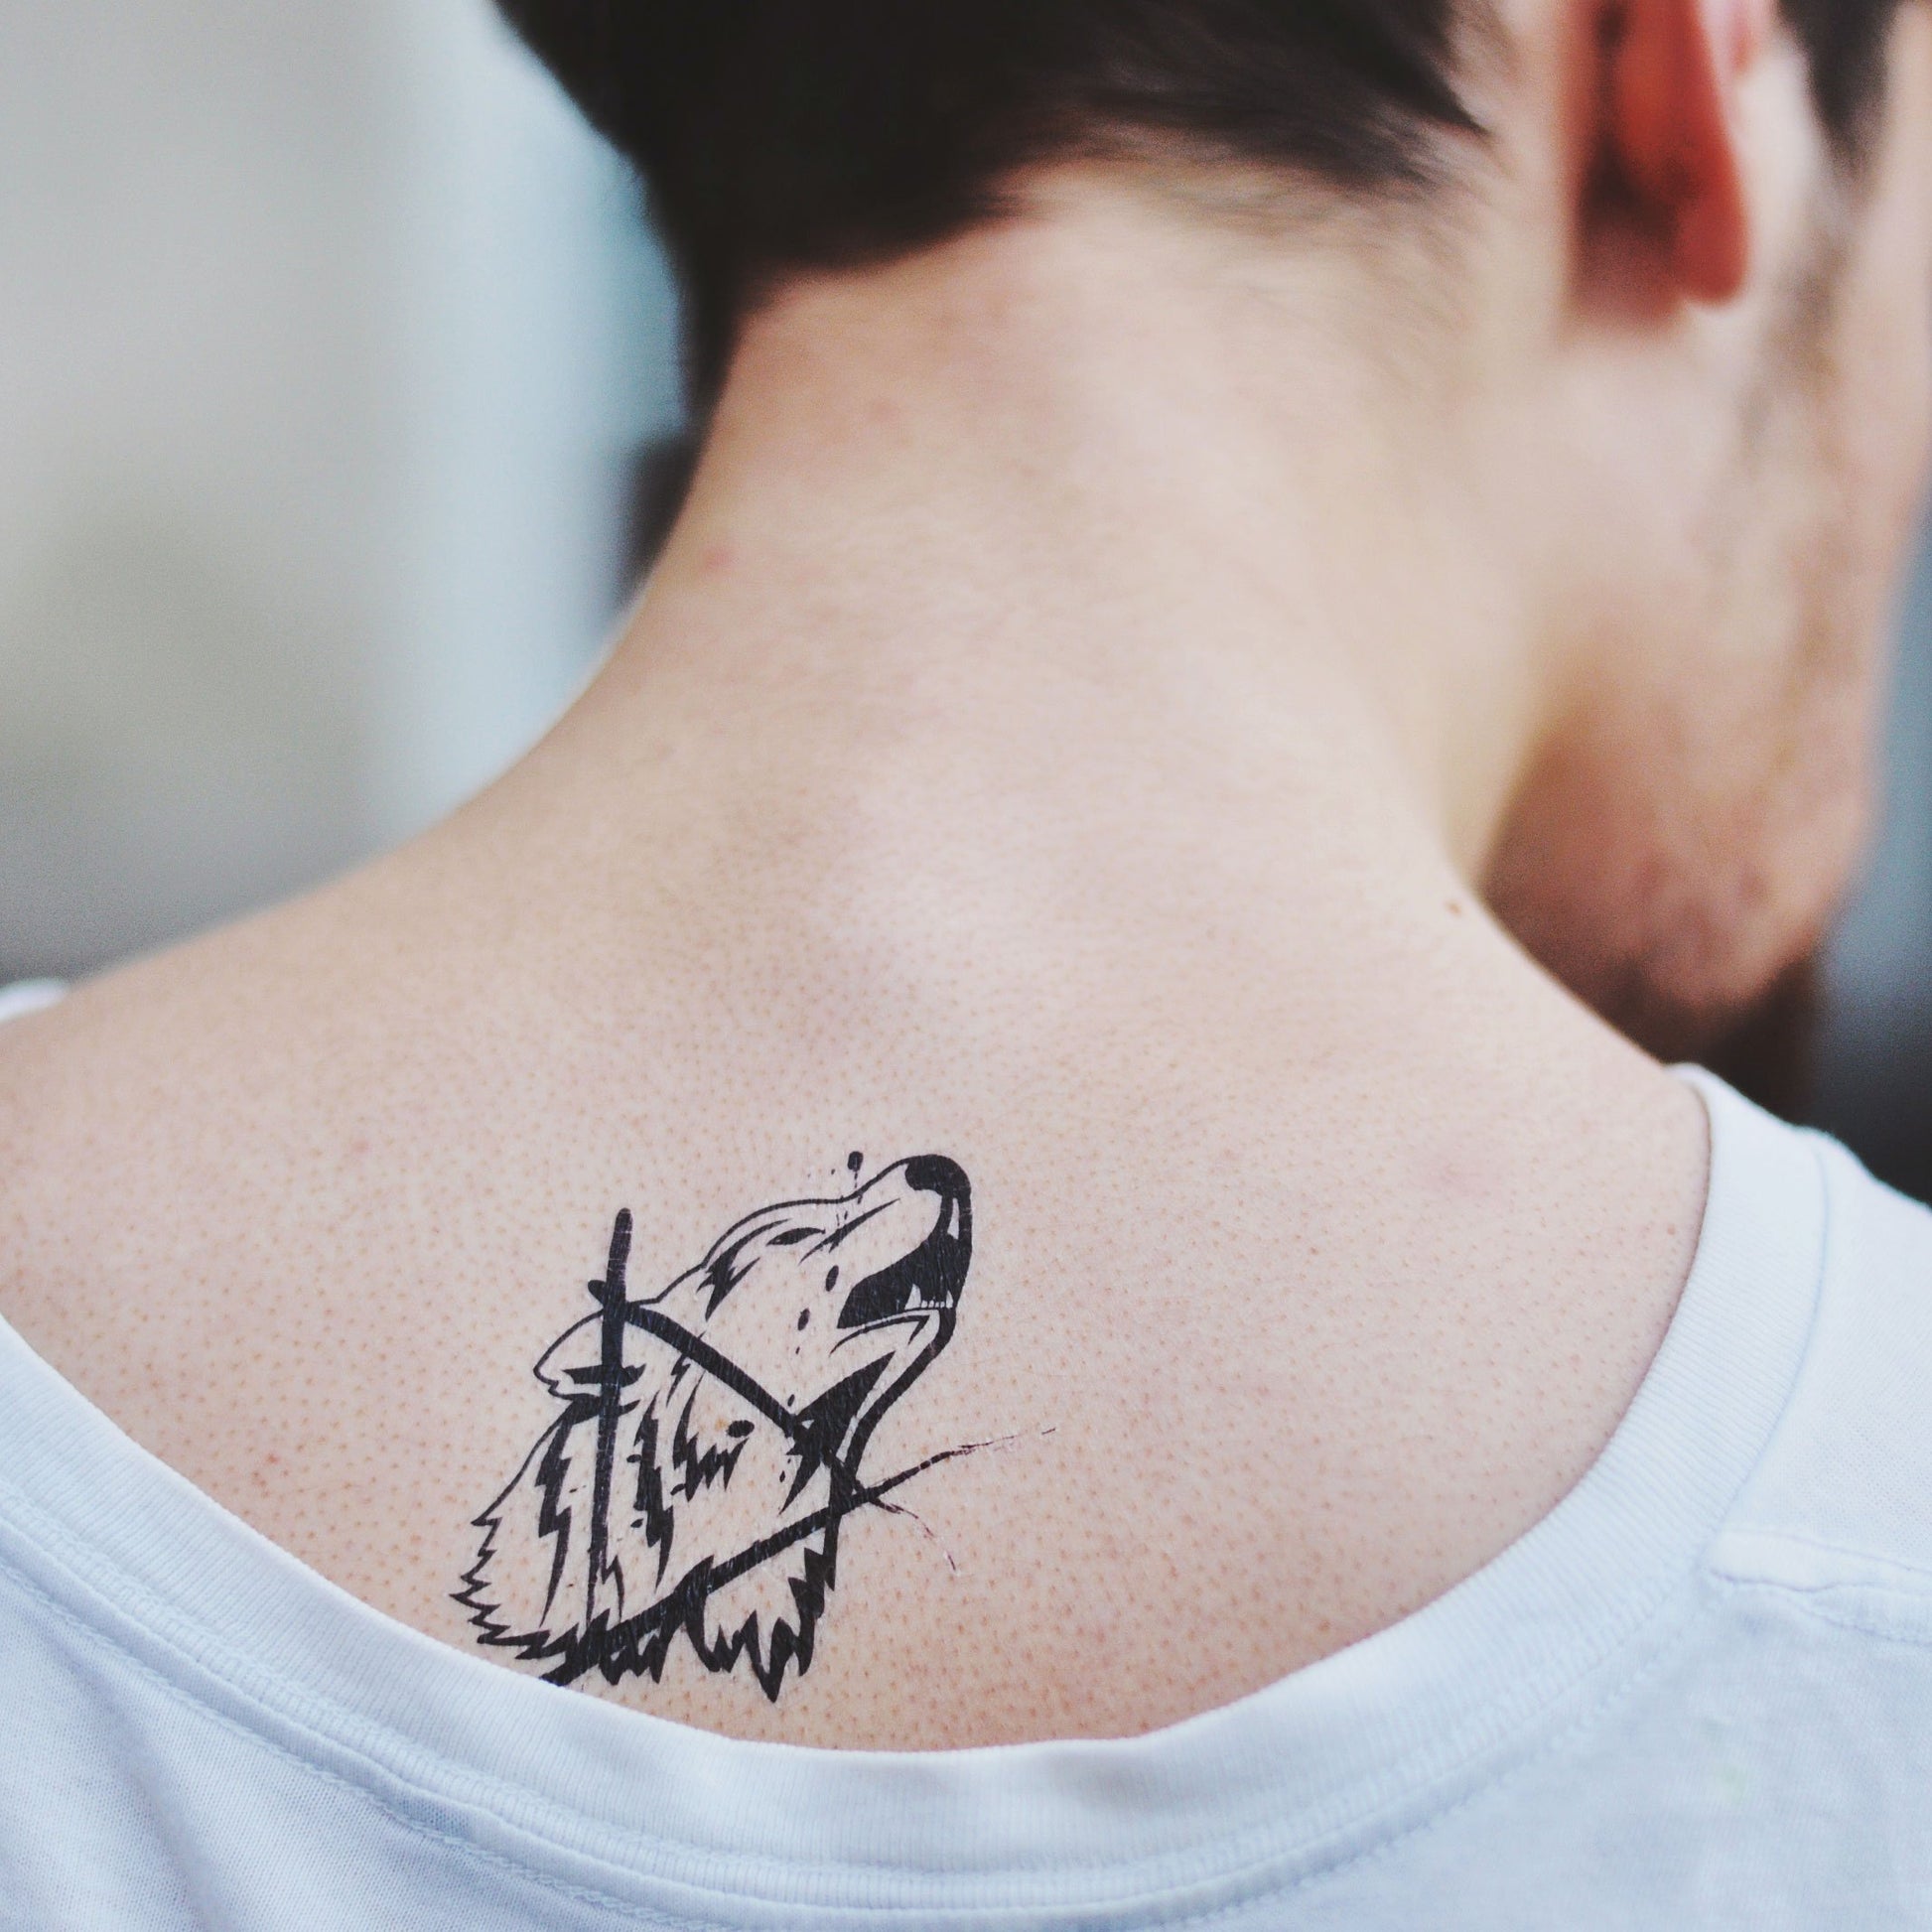 fake small little lone wolf werewolf coyote back tattoo for men animal temporary tattoo sticker design idea on back